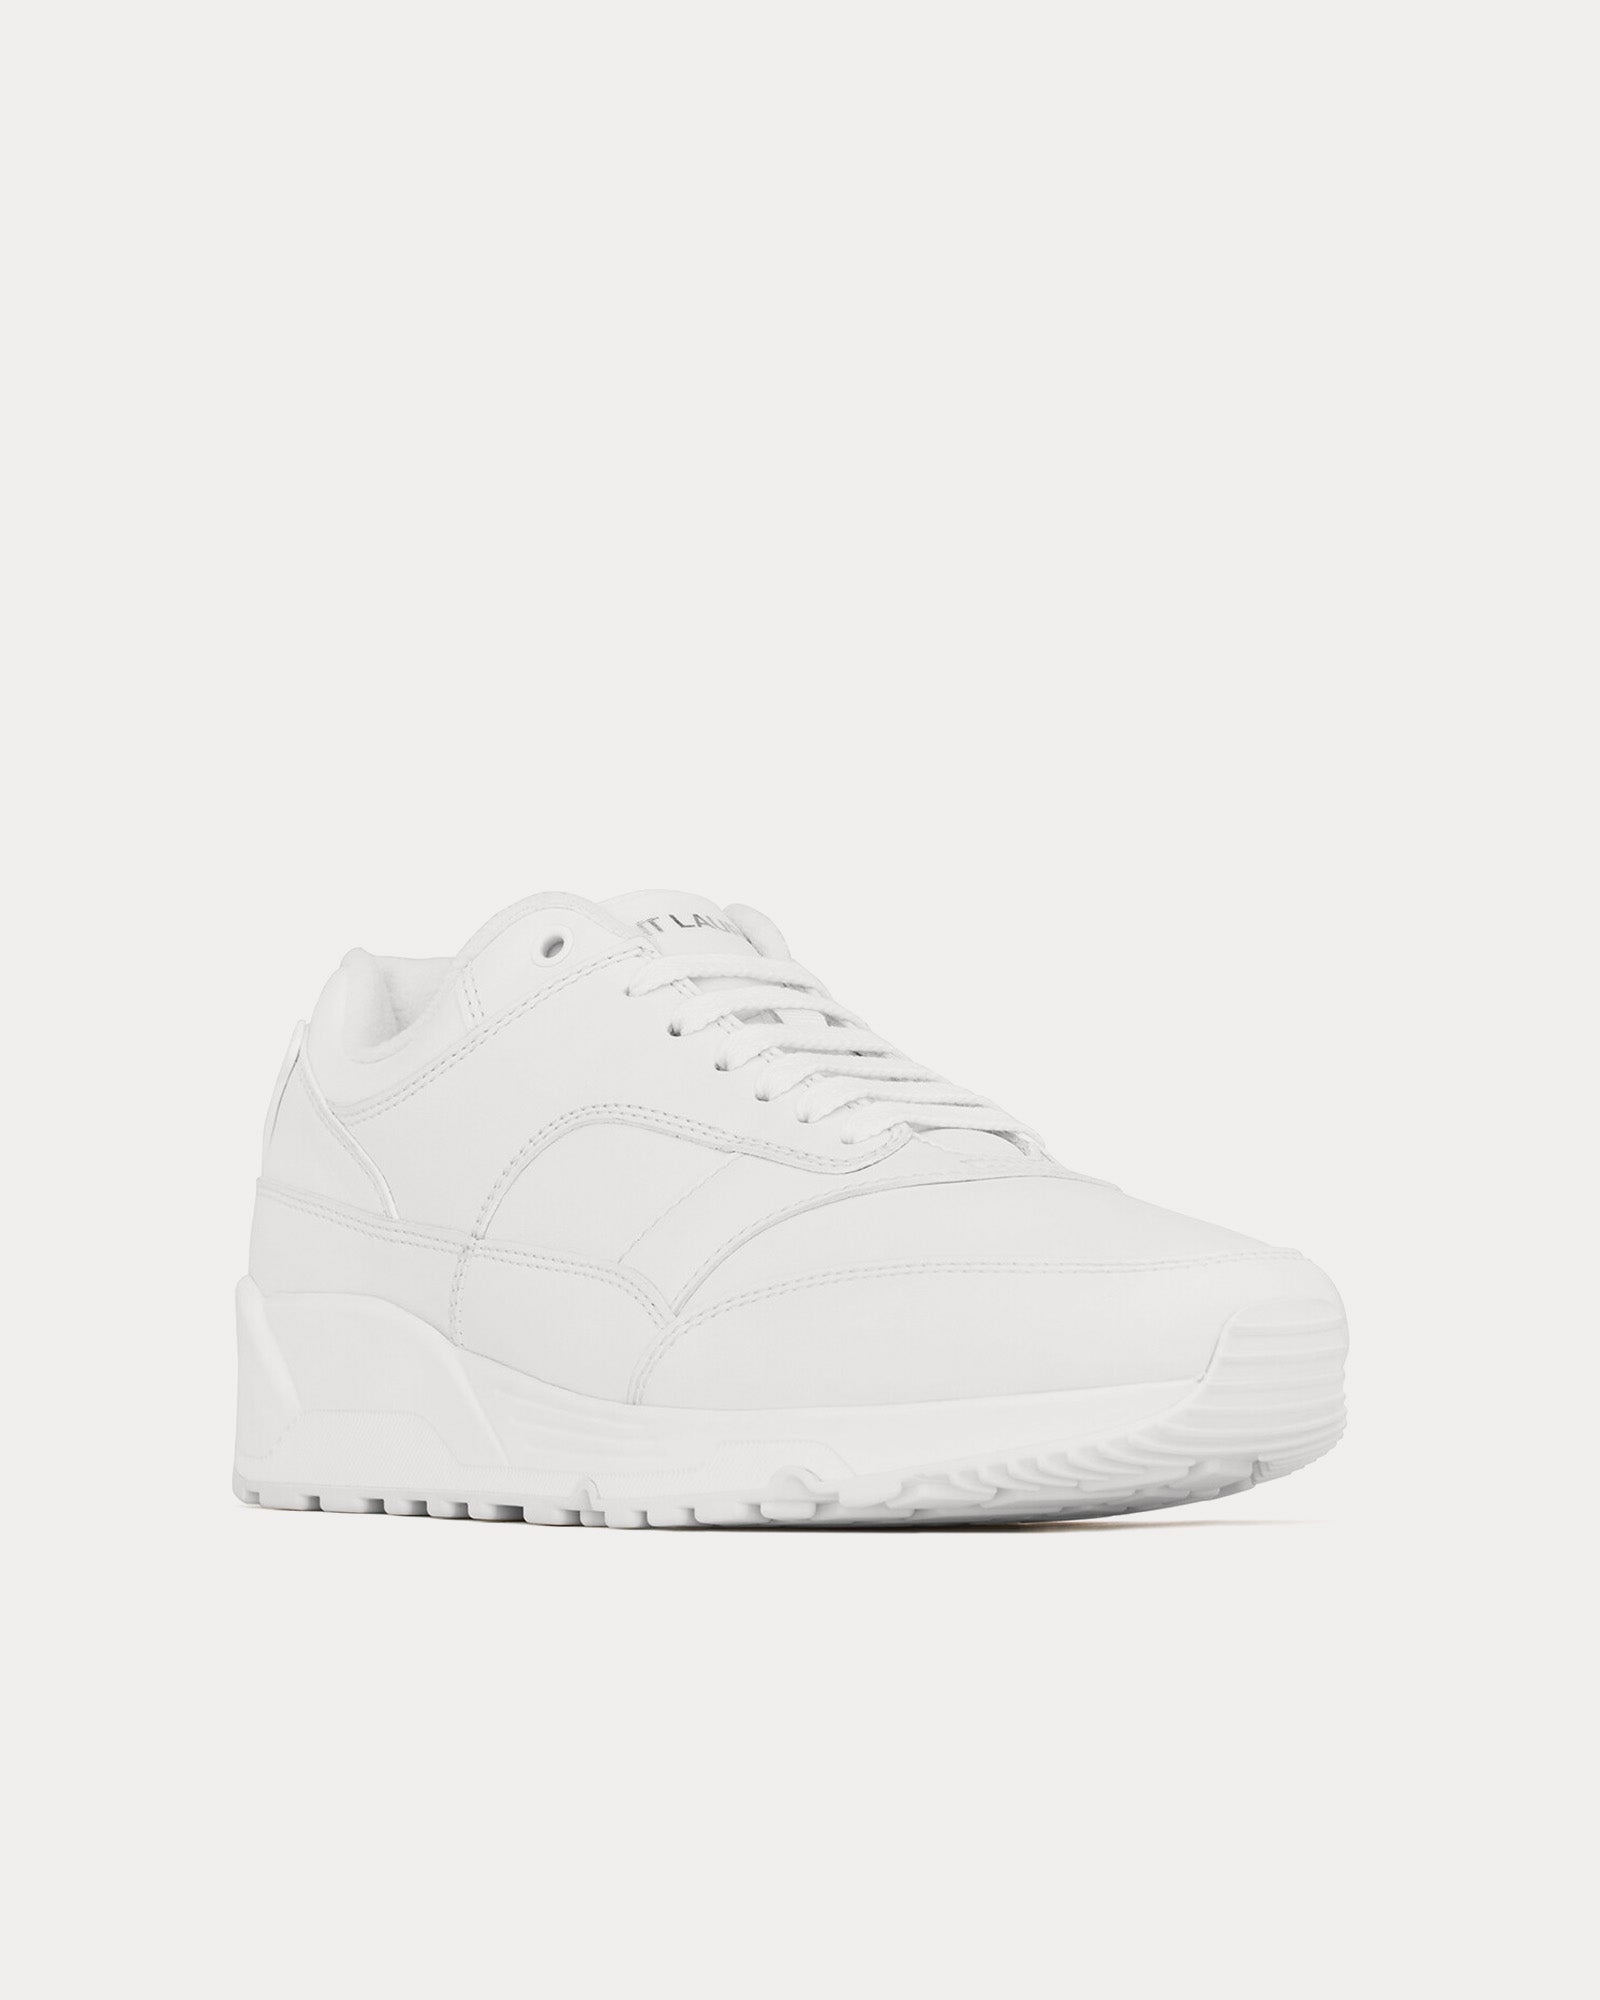 Saint Laurent - Bump Smooth Leather Blanc Optique Low Top Sneakers